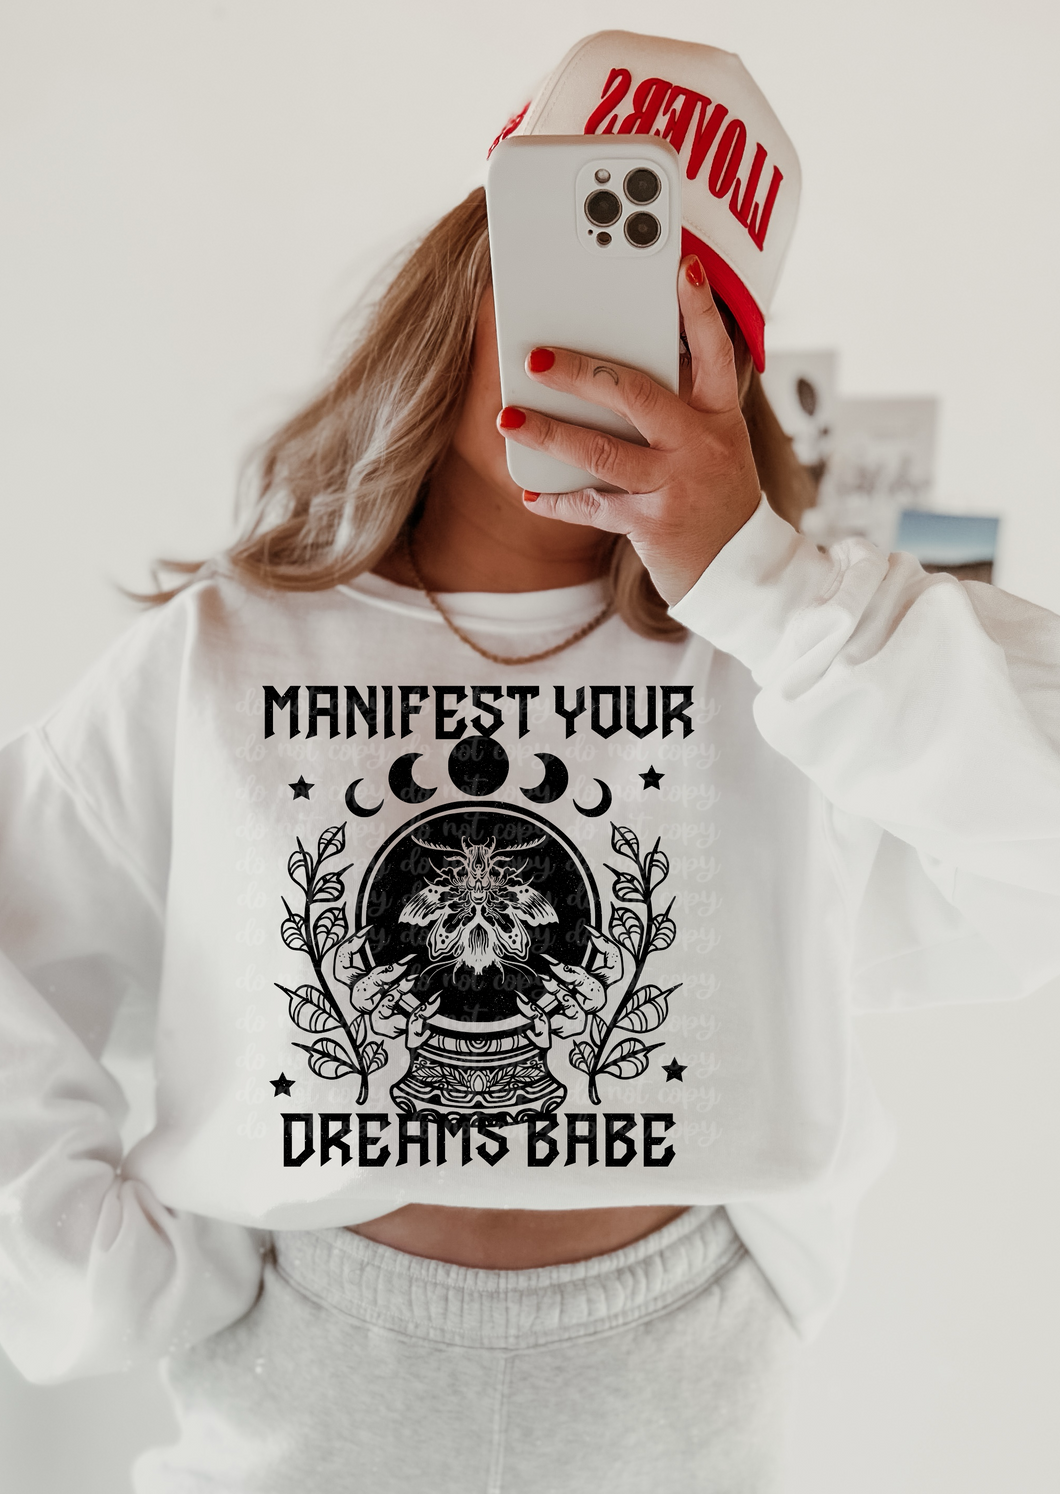 Manifest Your Dreams Babe